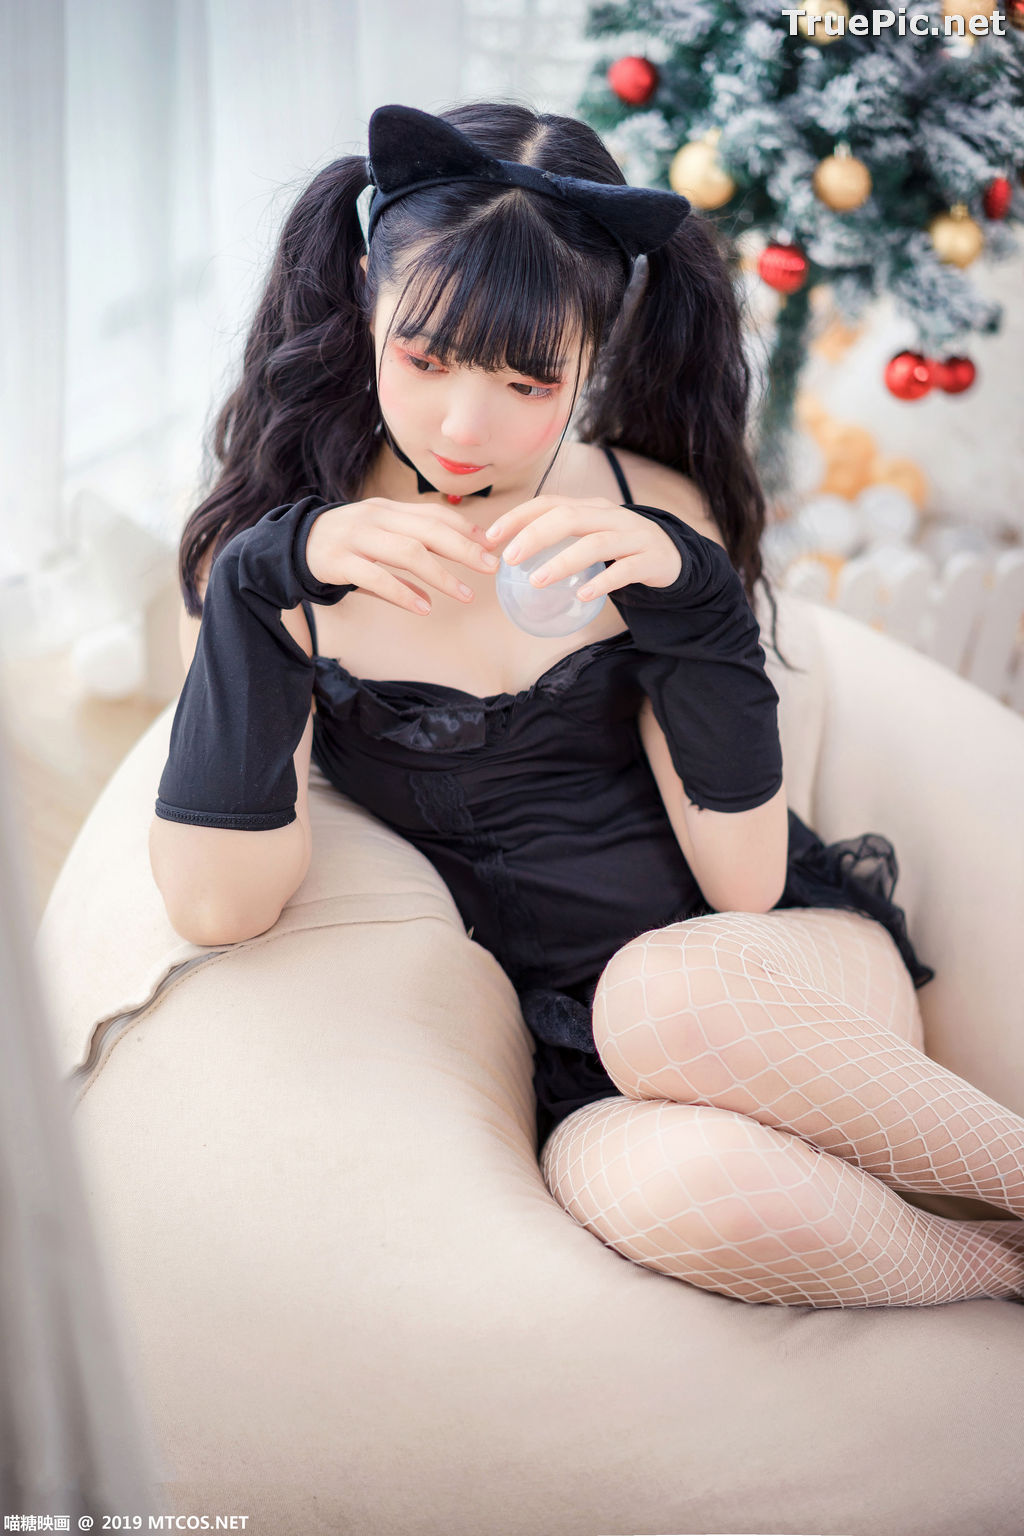 Image [MTCos] 喵糖映画 Vol.045 – Chinese Cute Model – Black Cat Girl - TruePic.net - Picture-11